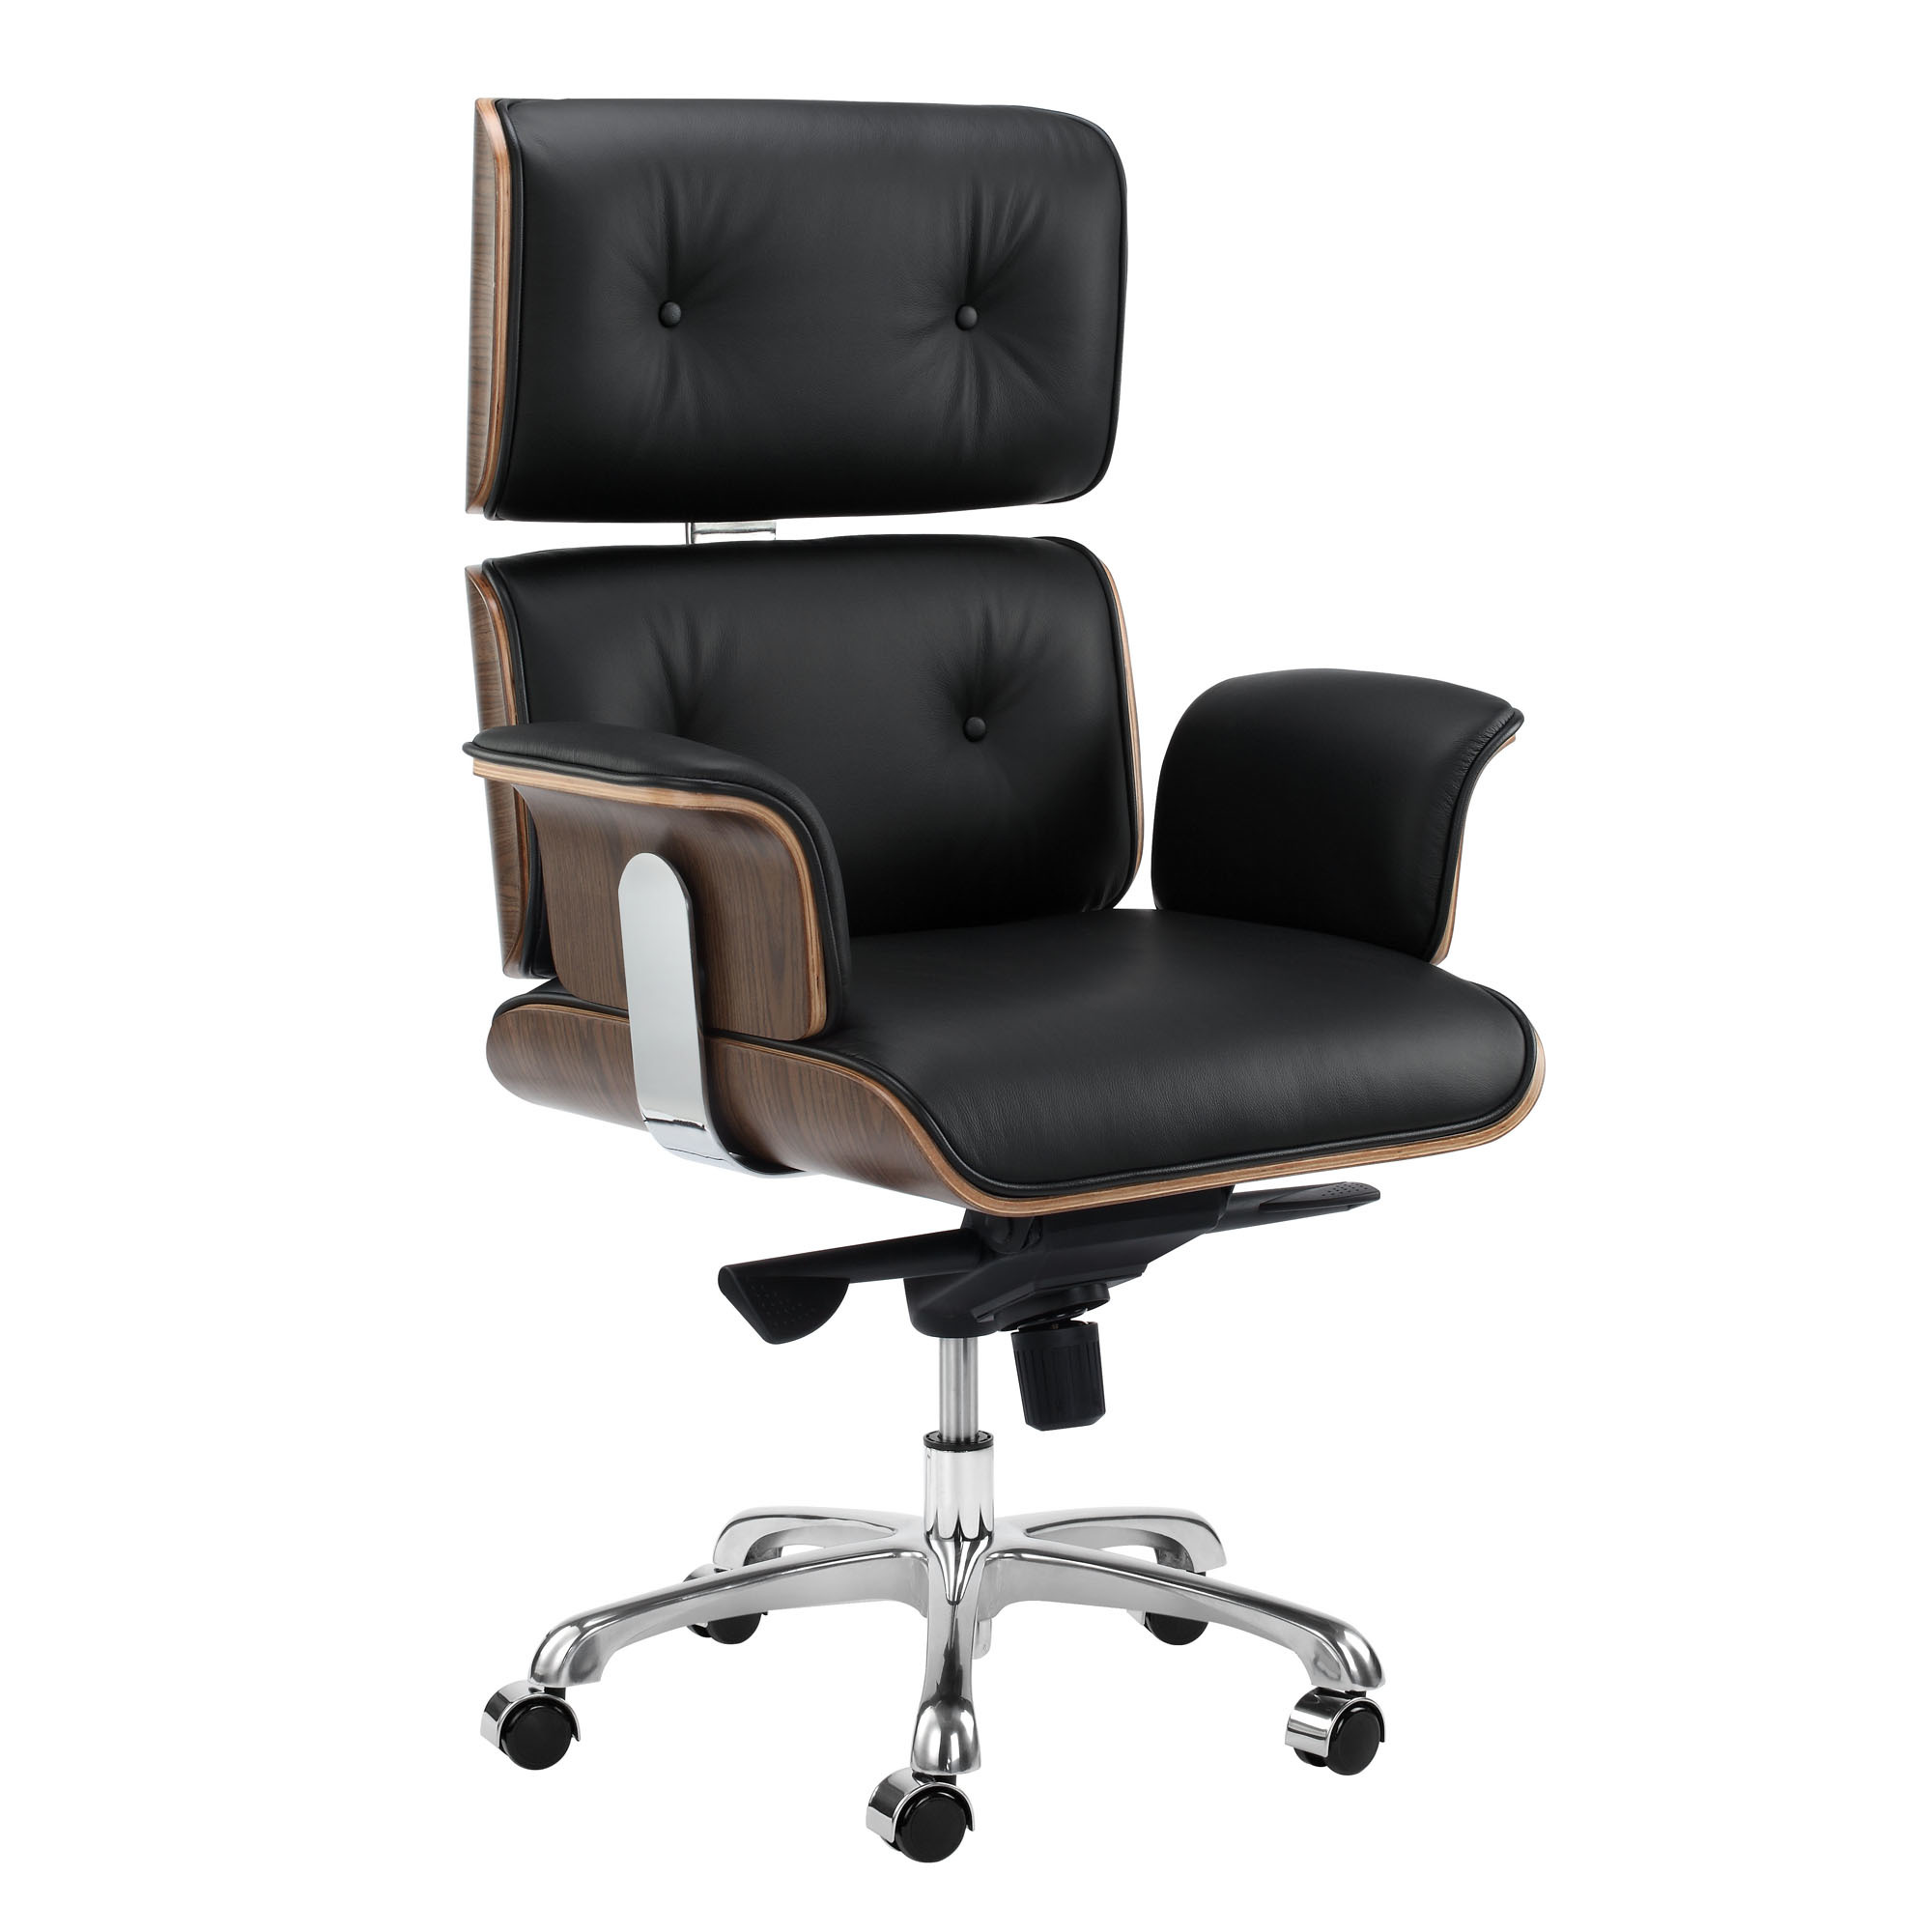 Milan Direct Eames Premium Replica, Grey Leather Executive Office Chair